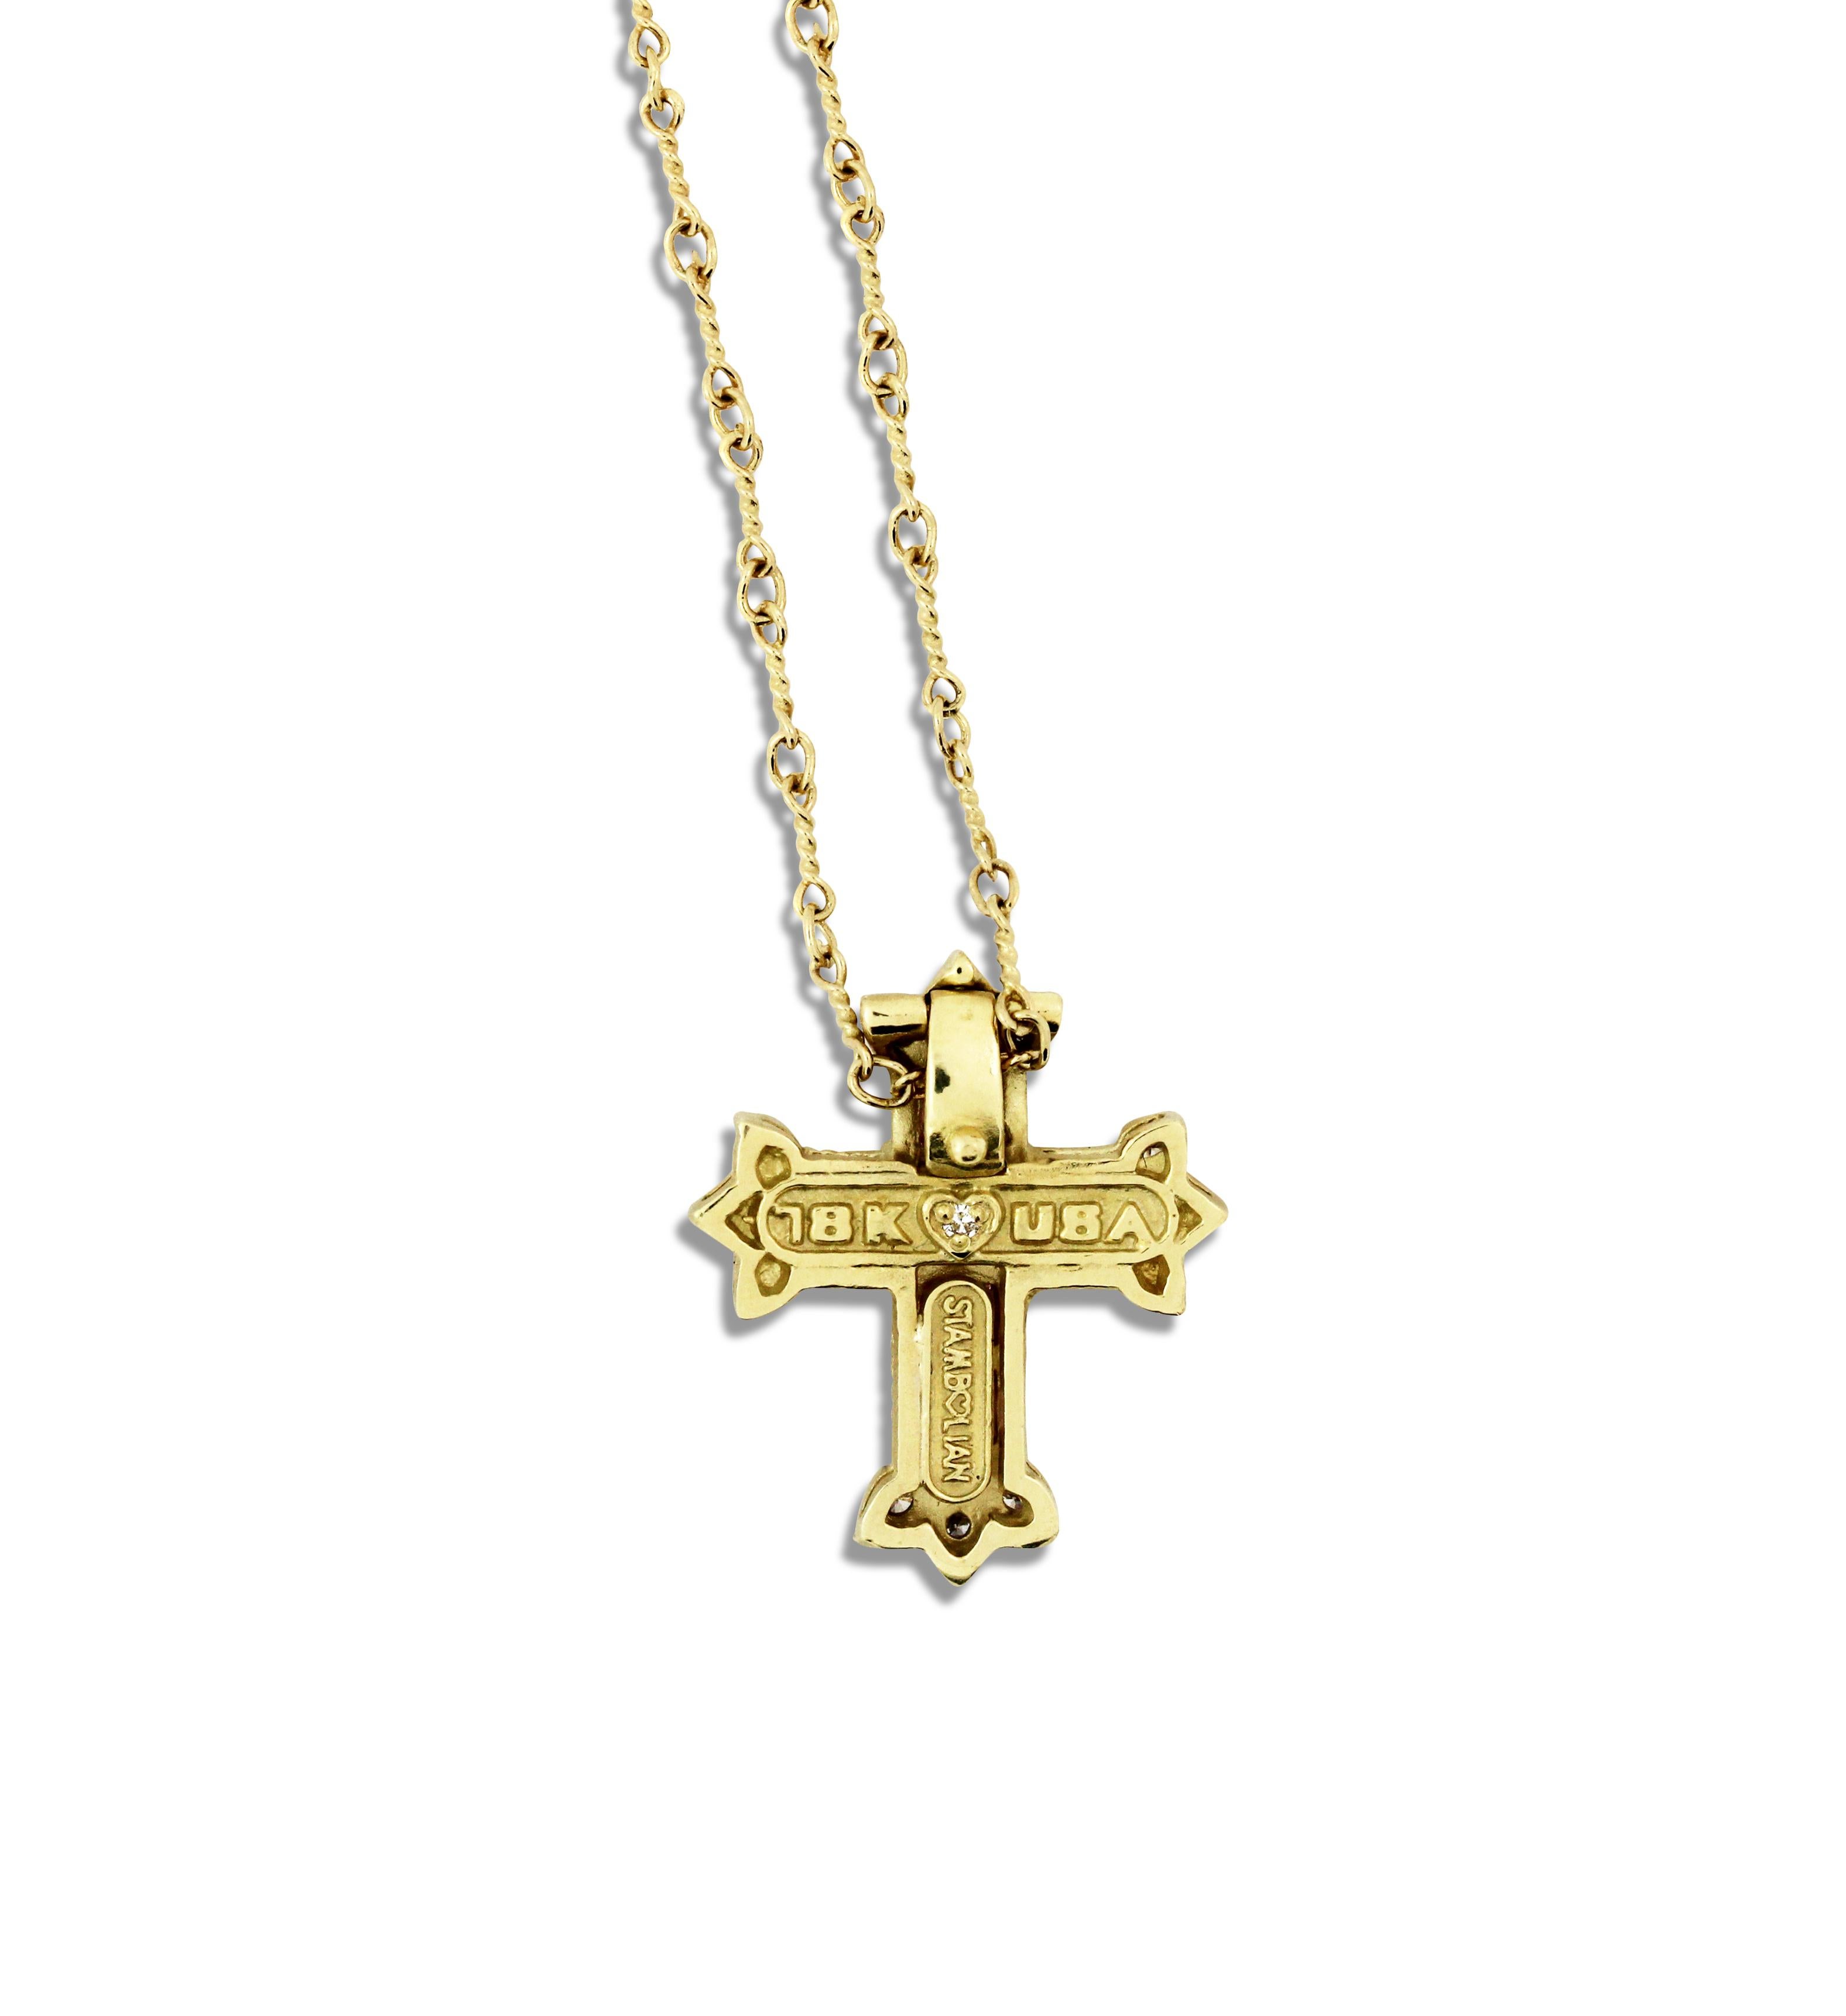 pink sapphire cross necklace